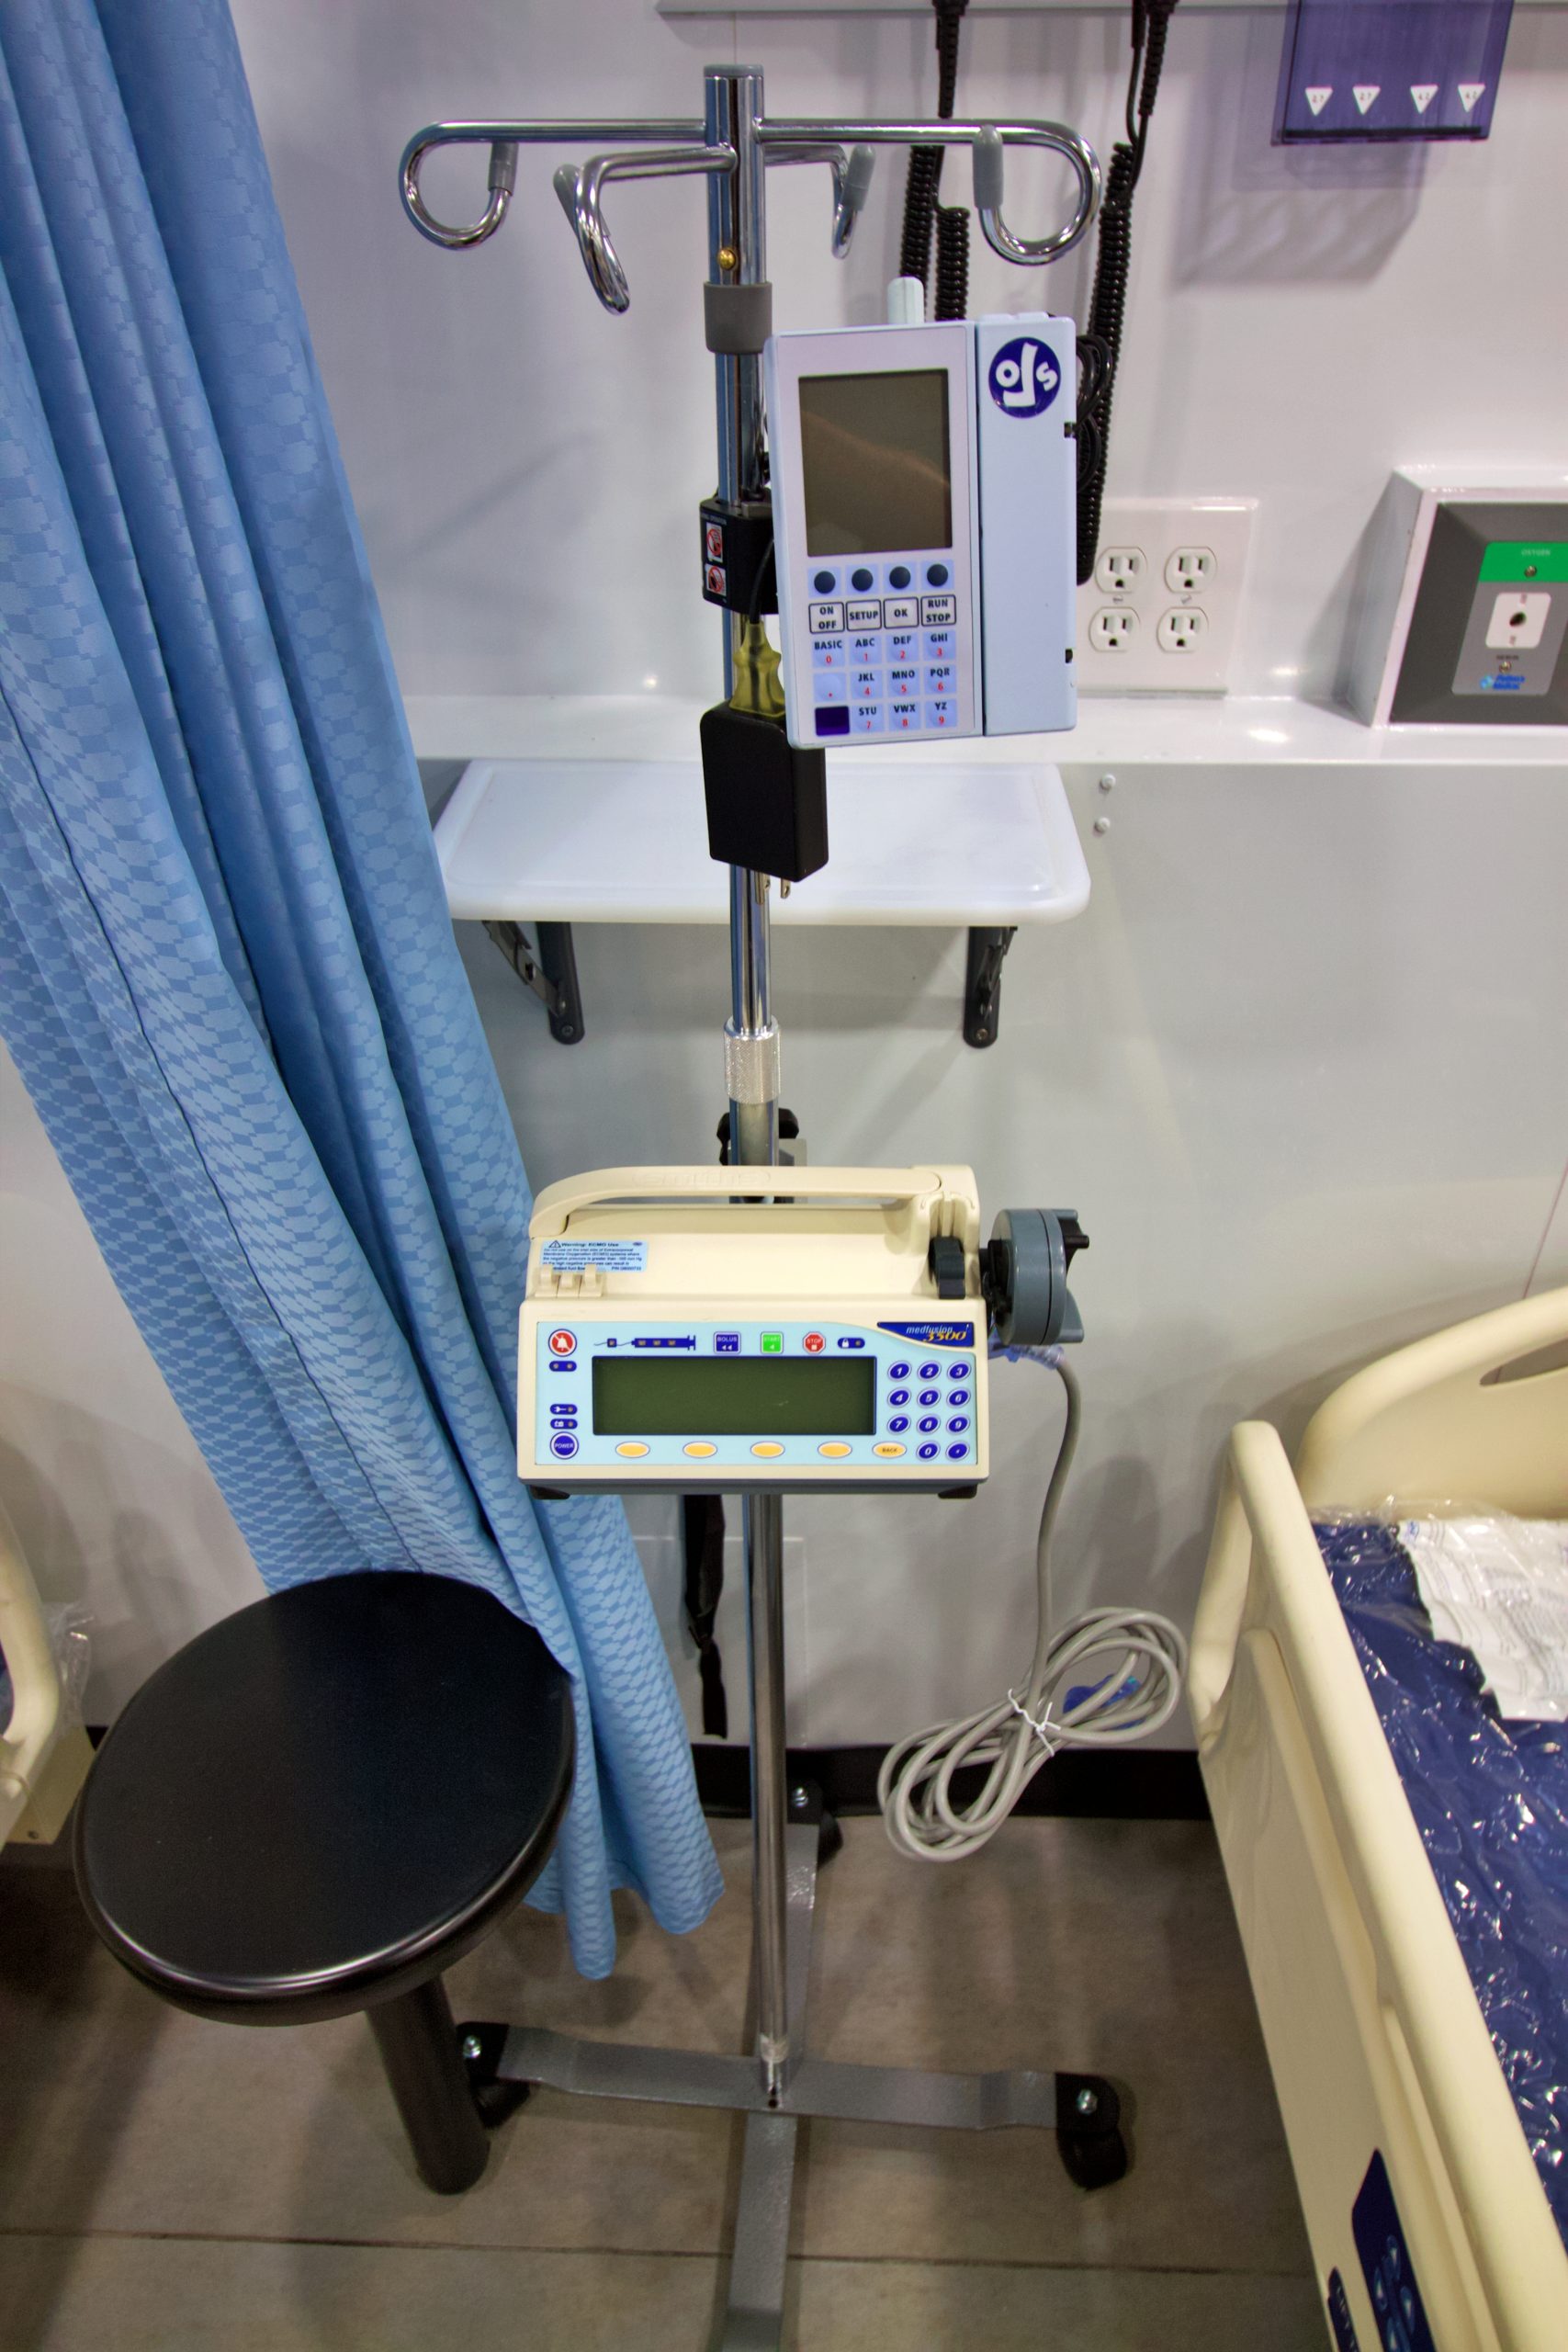 TXMED Interior with medical equipment